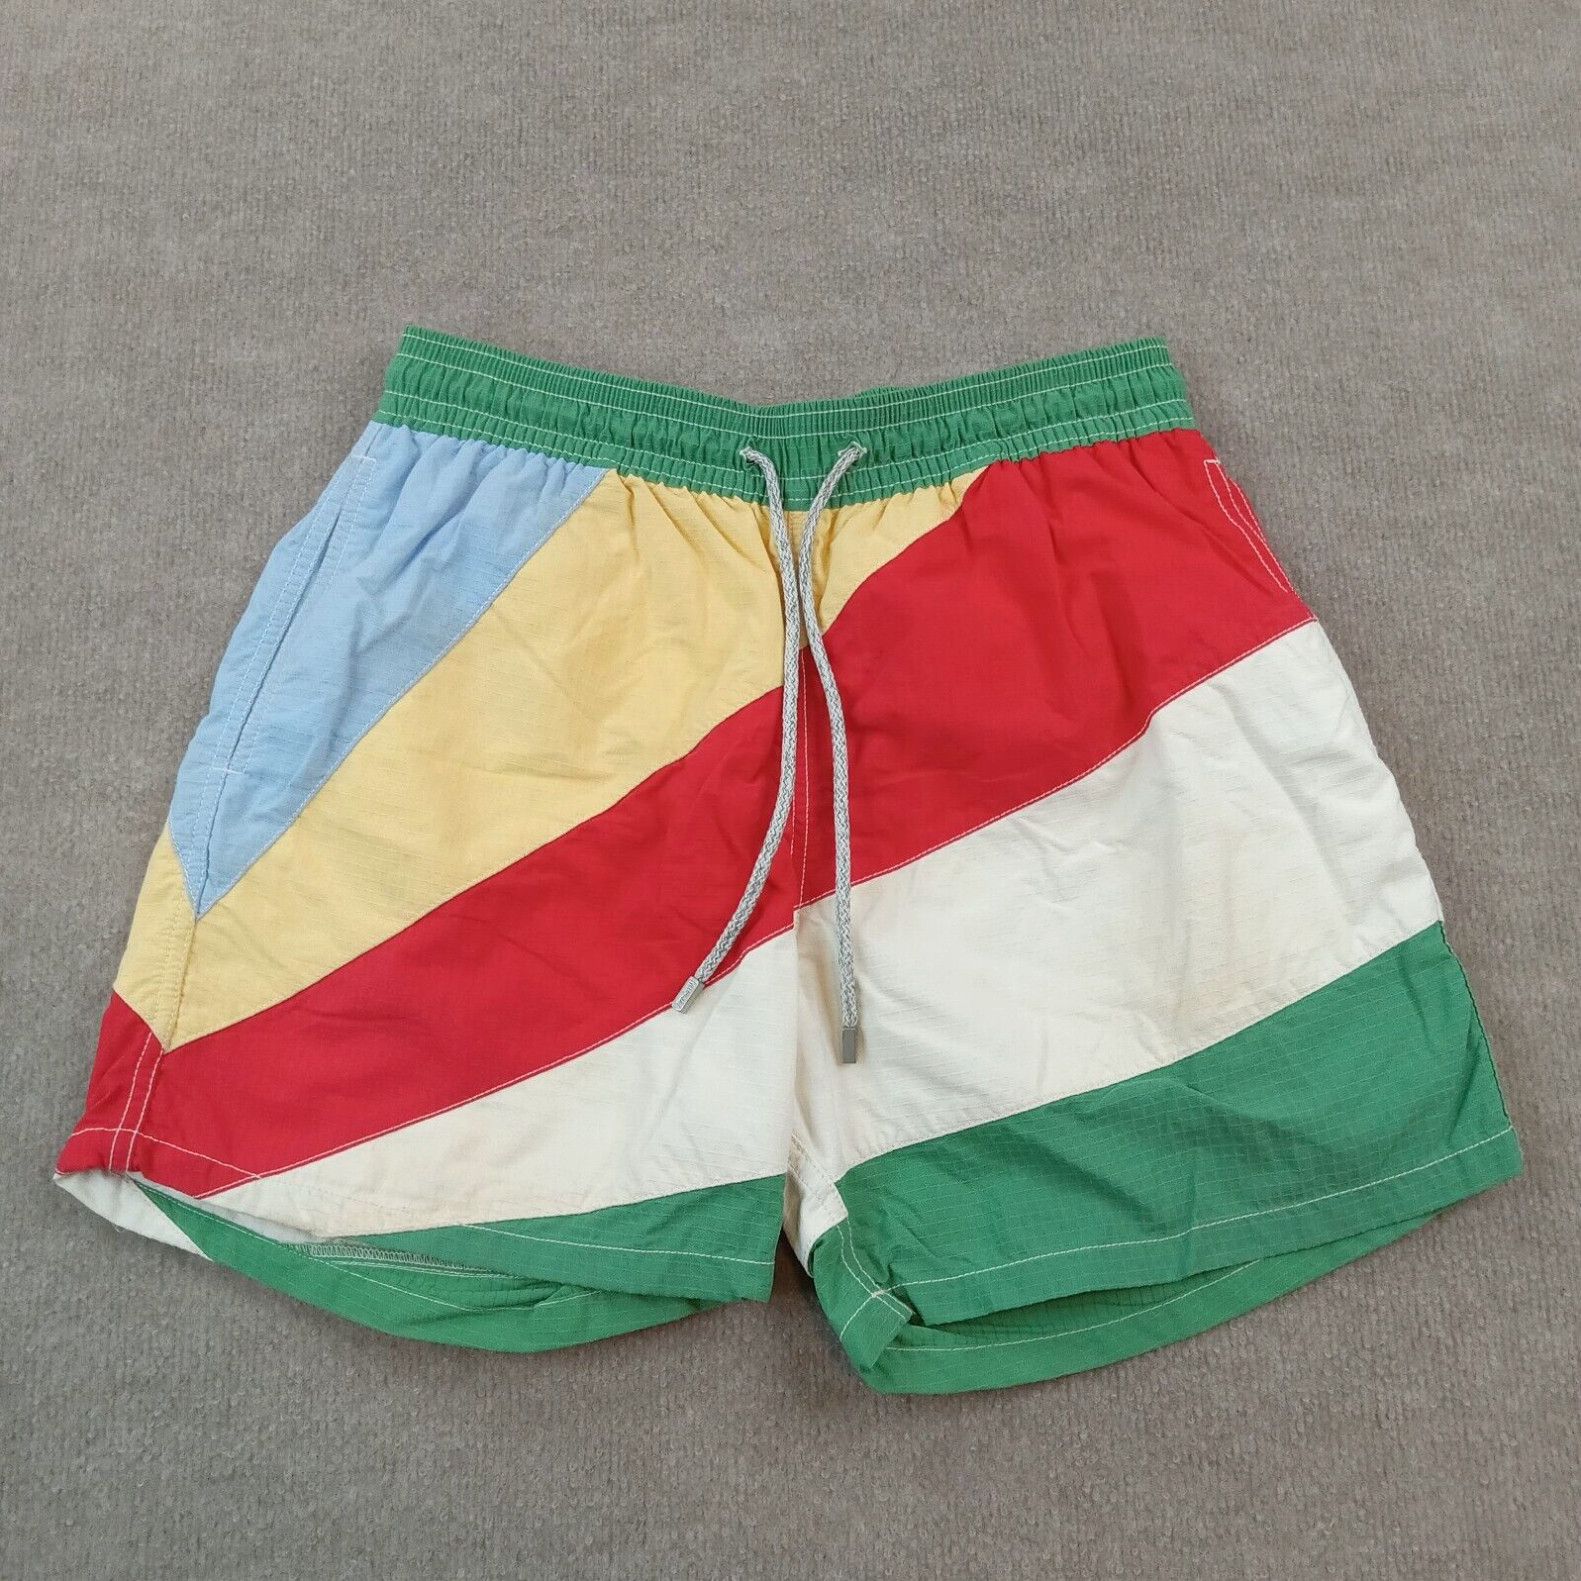 Vilebrequin Vilebrequin Swim Trunks Mens Extra Large XL Green Red Mesh Lined Elastic Waist Size US 36 / EU 52 - 1 Preview